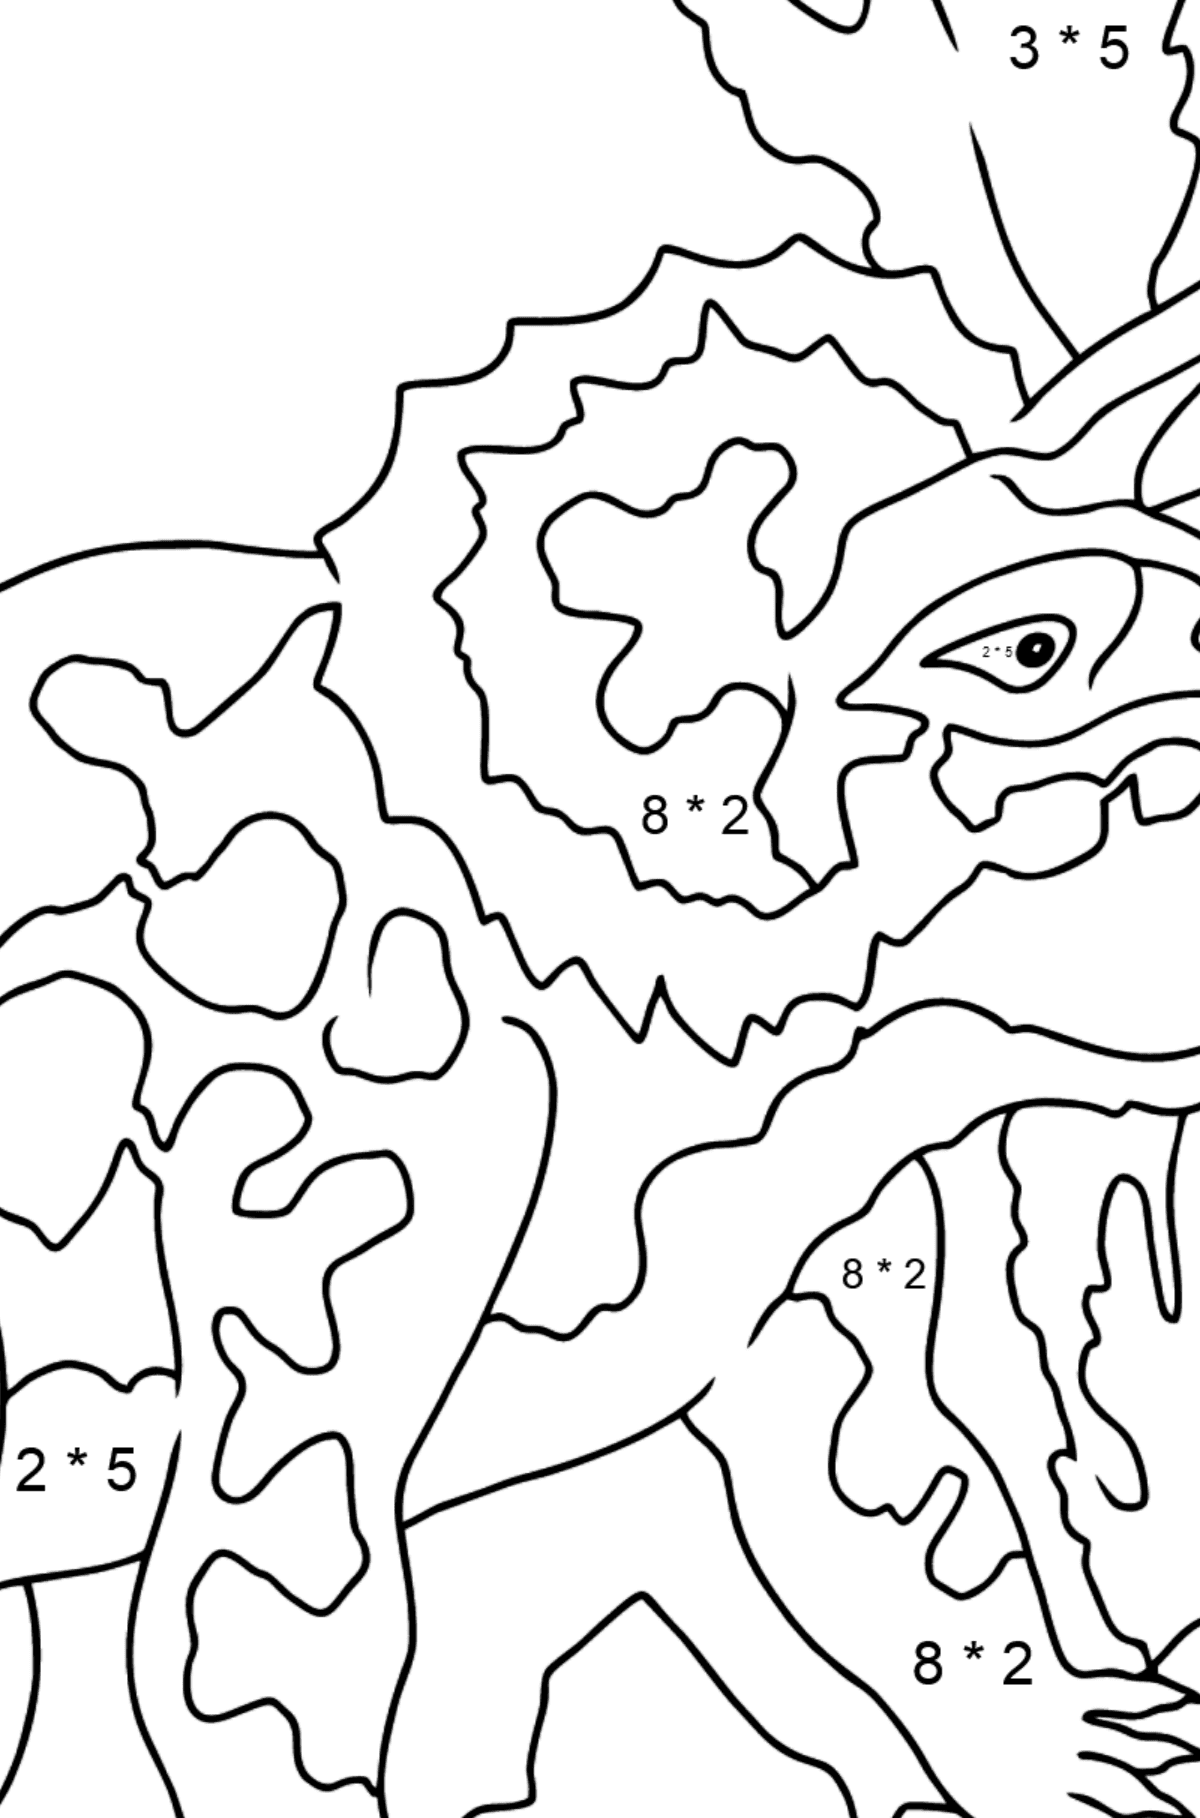 Triceratops Coloring Page - Math Coloring - Multiplication for Kids